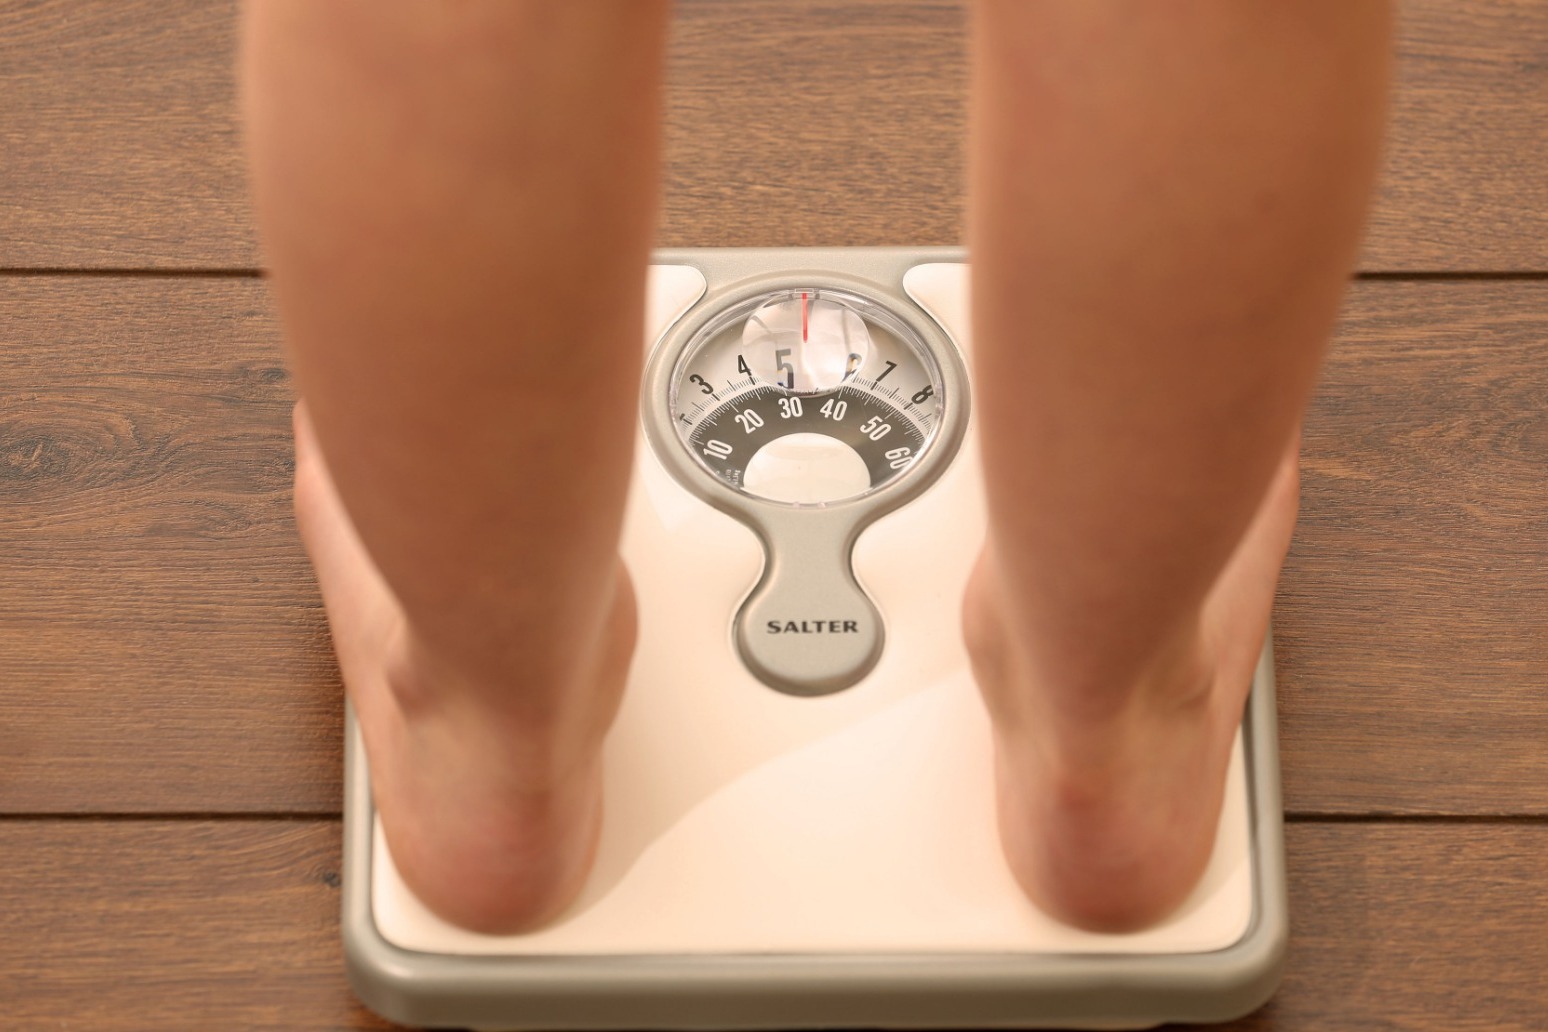 Long waits for eating disorders treatment ‘putting lives at risk’ 